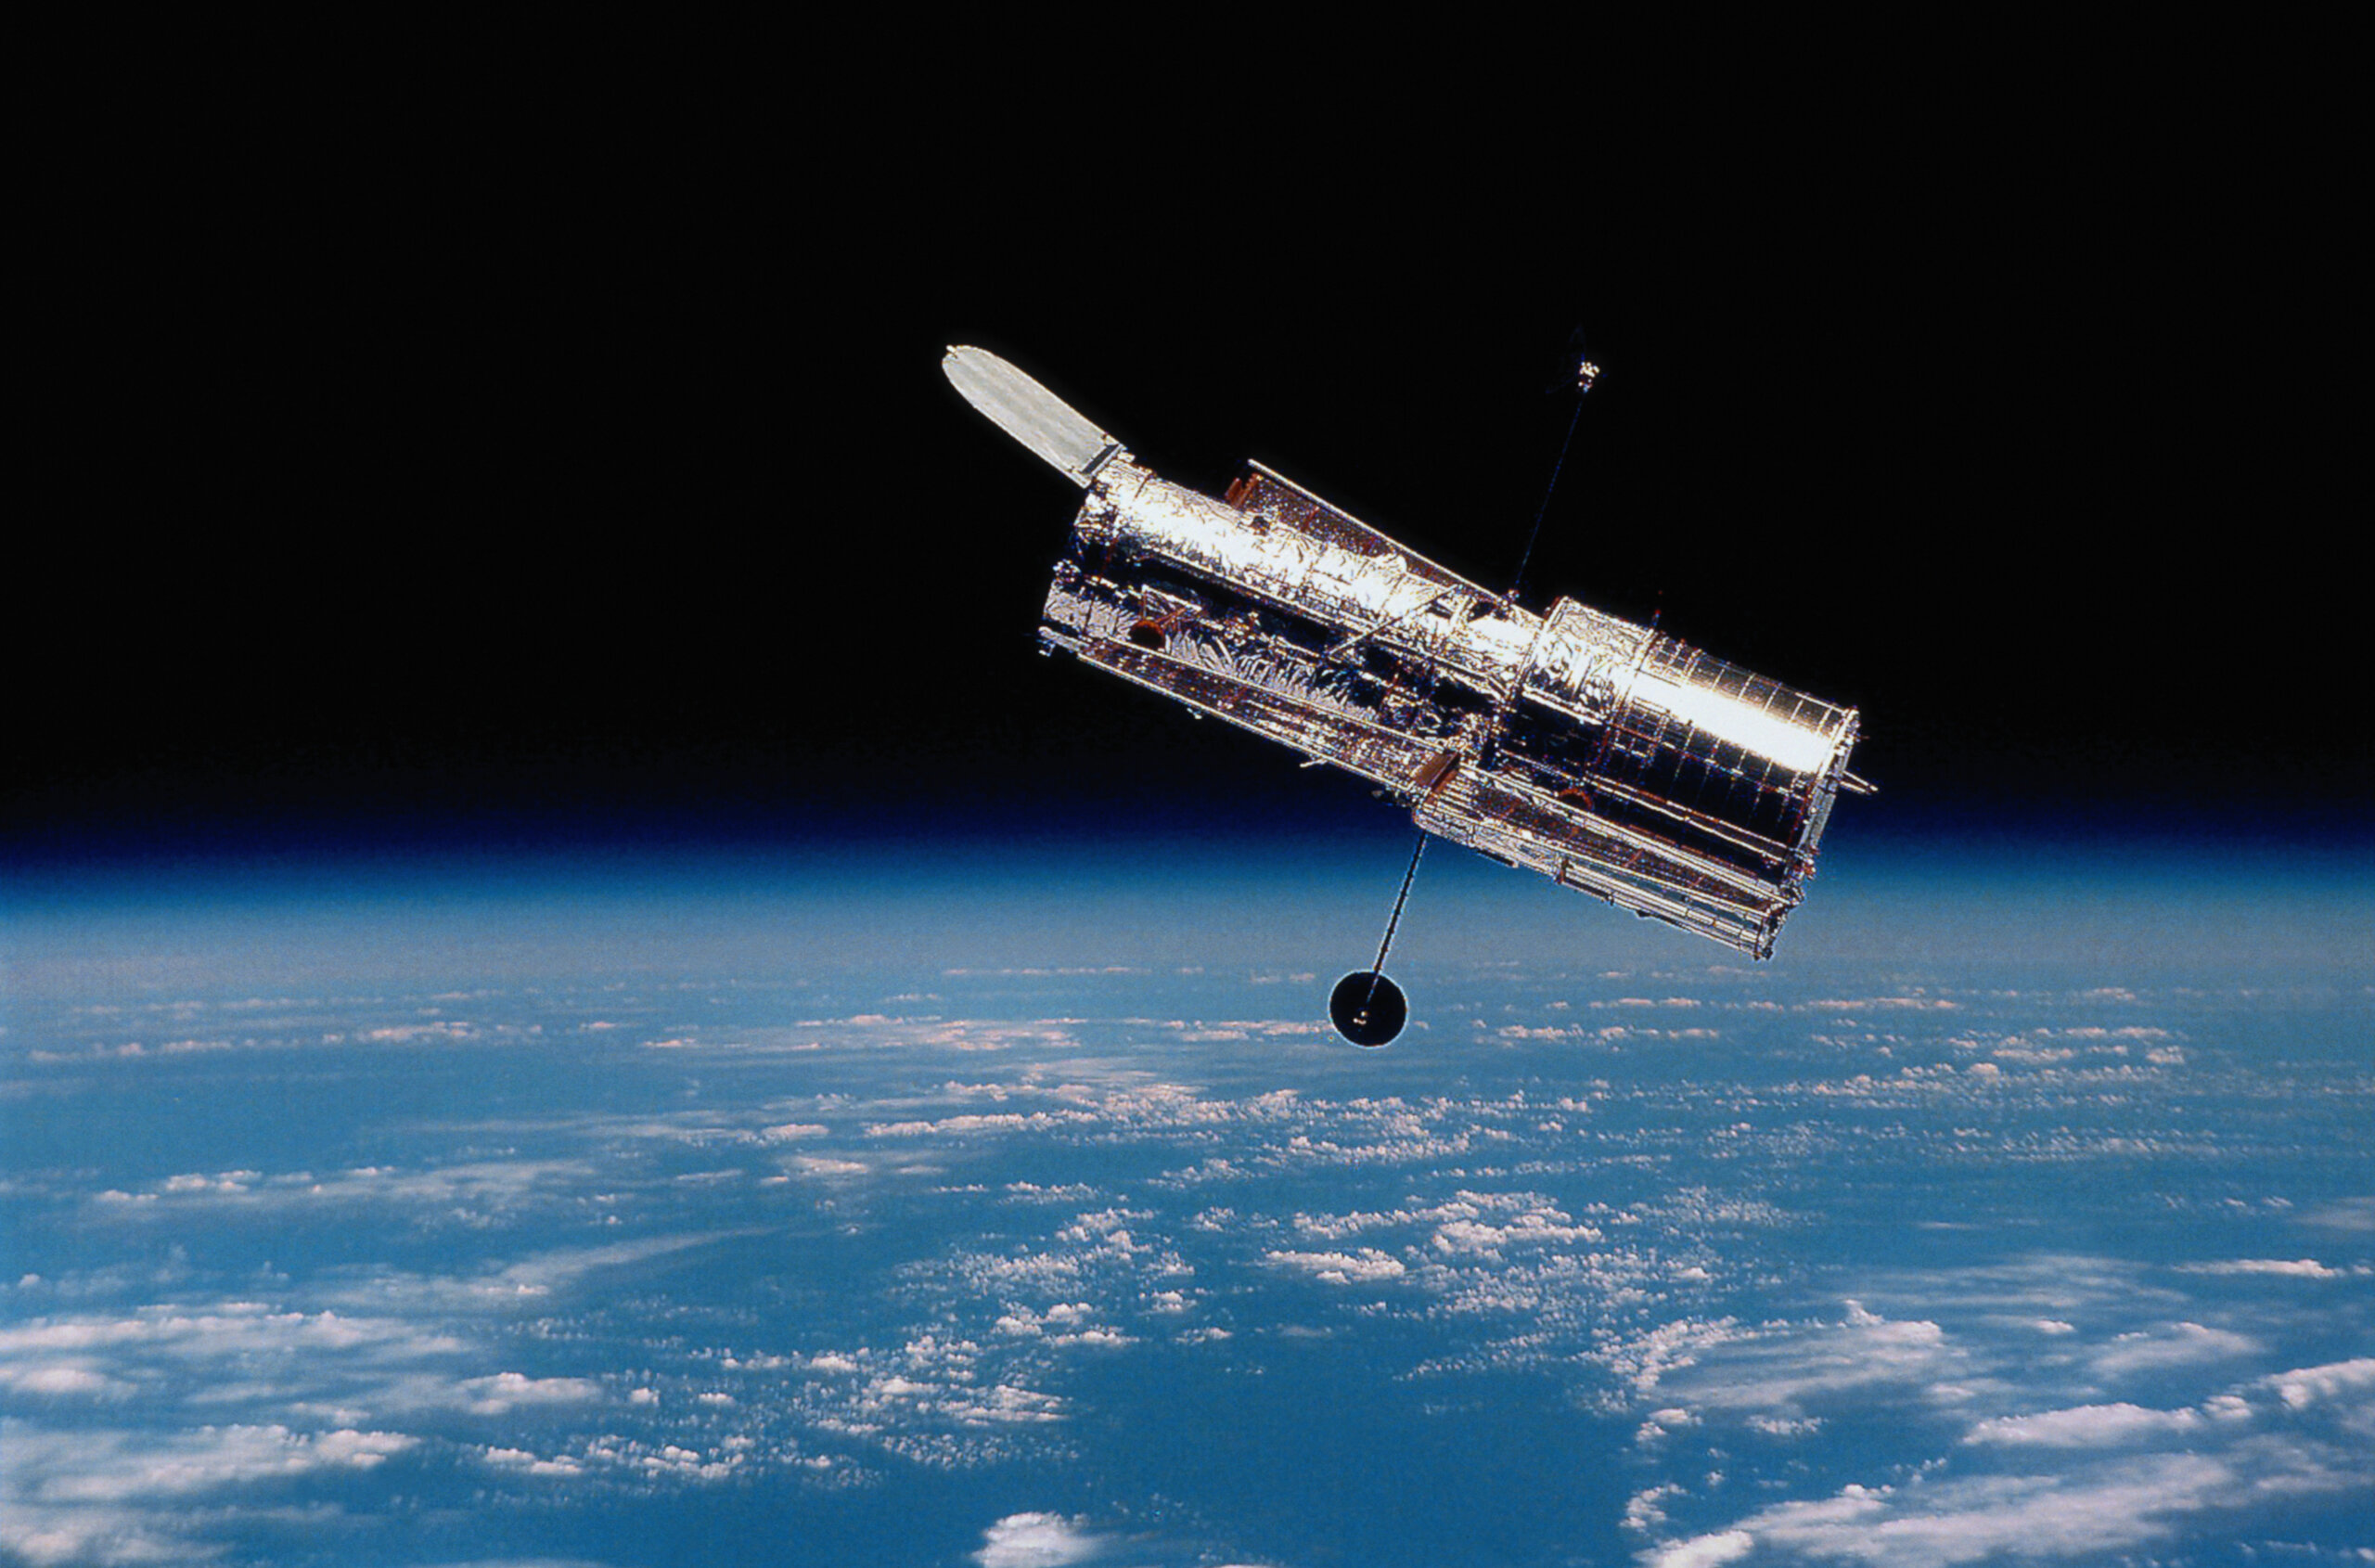 Hubble can also maintain noticed basically the most far away neatly-known person up to now